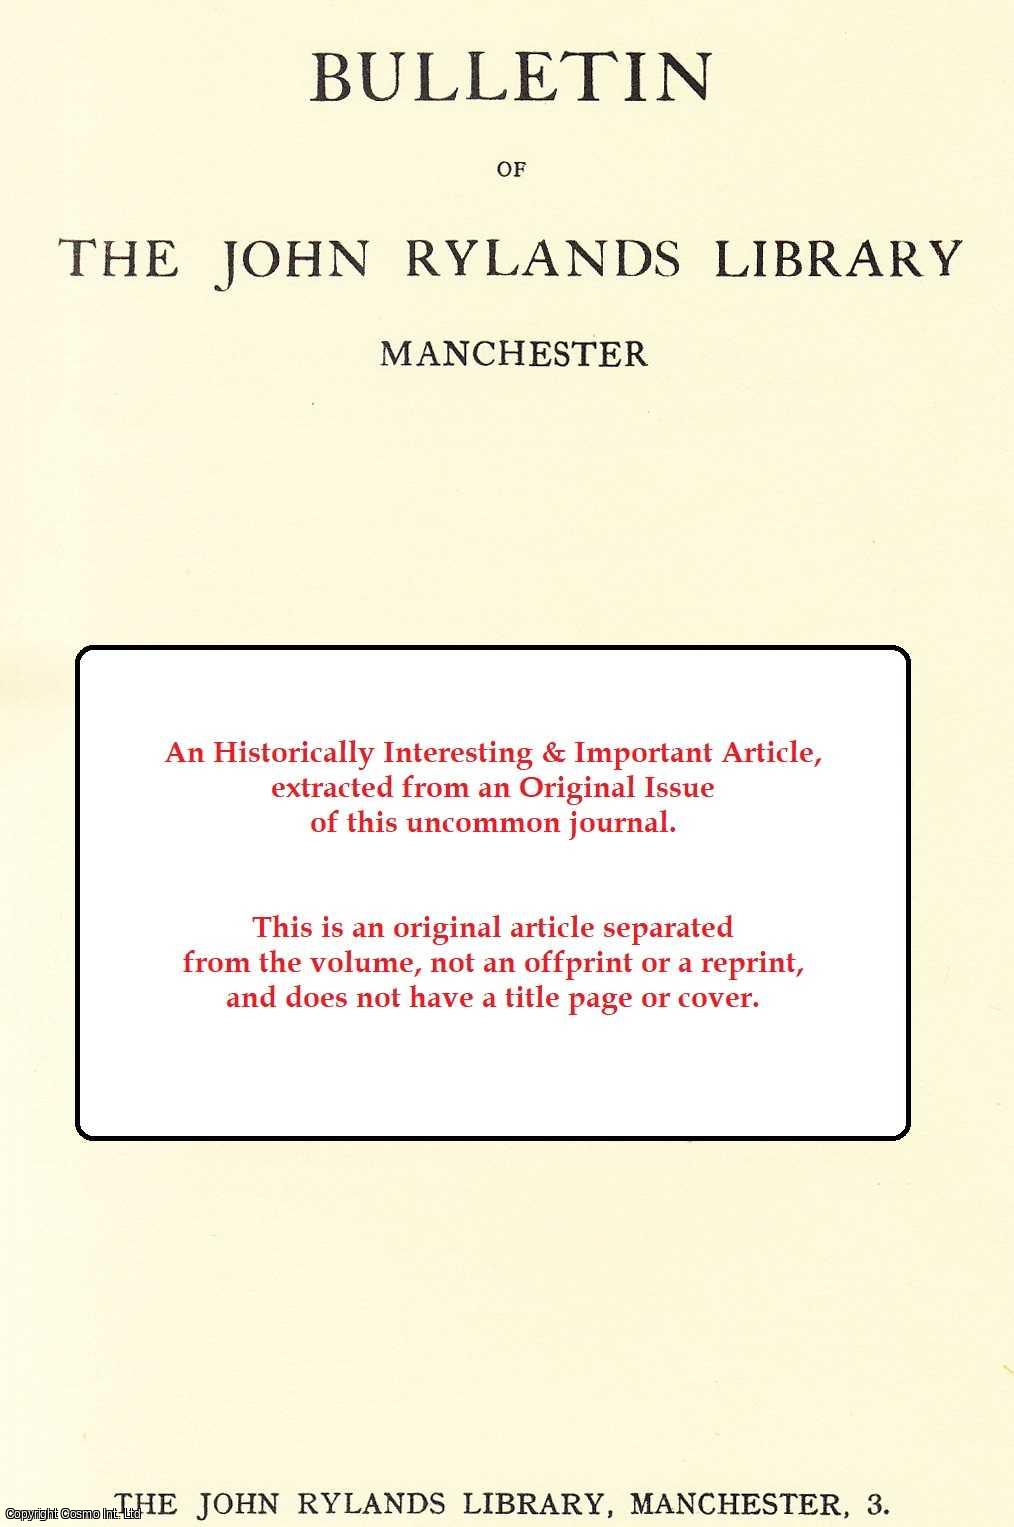 James Barr - The Book of Job and Its Modern Interpreters. An original article from the Bulletin of the John Rylands Library Manchester, 1971.